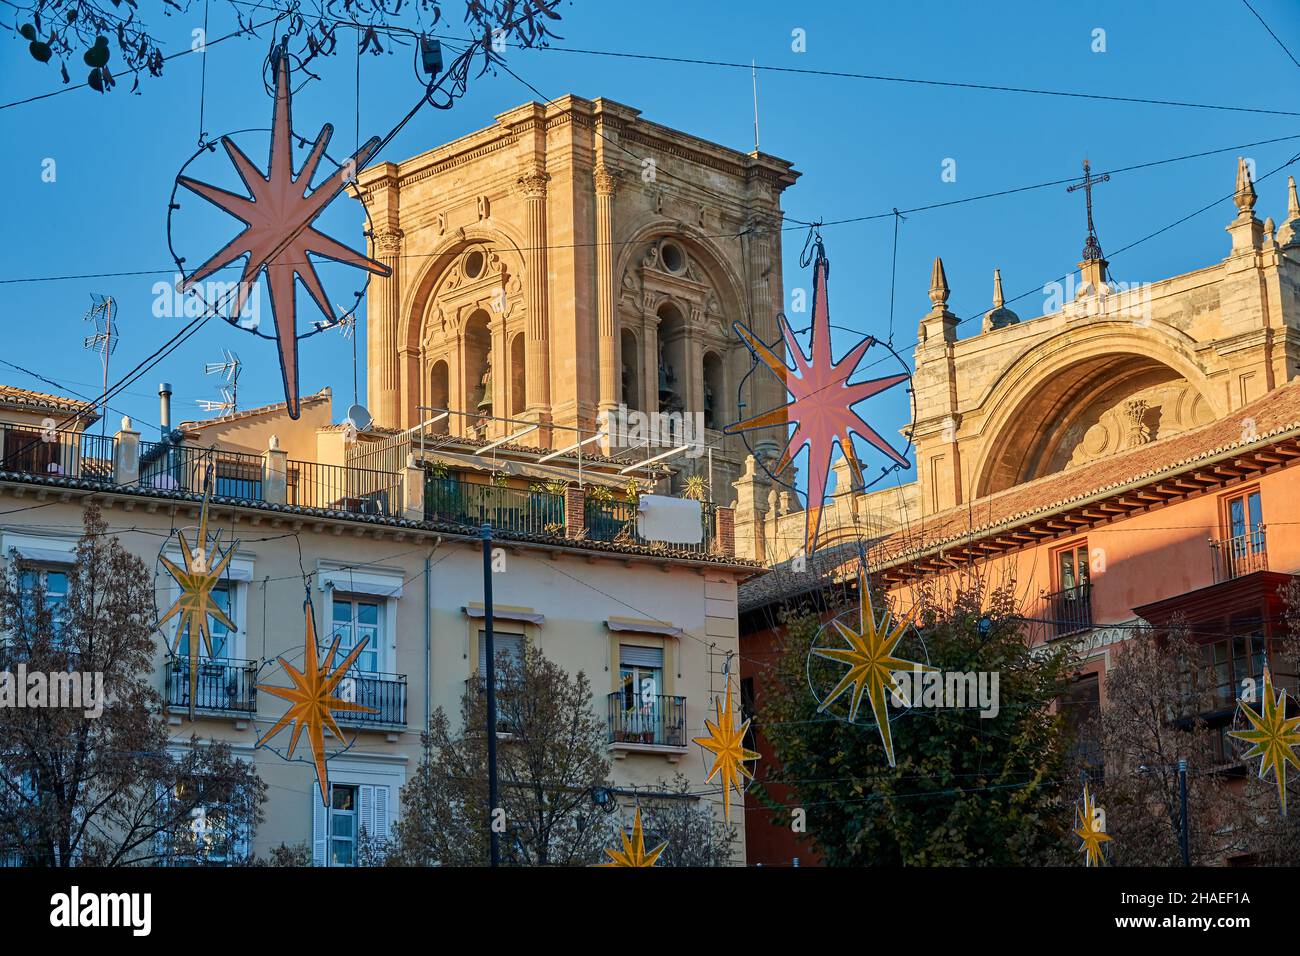 A walk in Granada: Plaza Bibrambla decorated with Christmas lighting with the cathedral in the background on a winter sunset Stock Photo